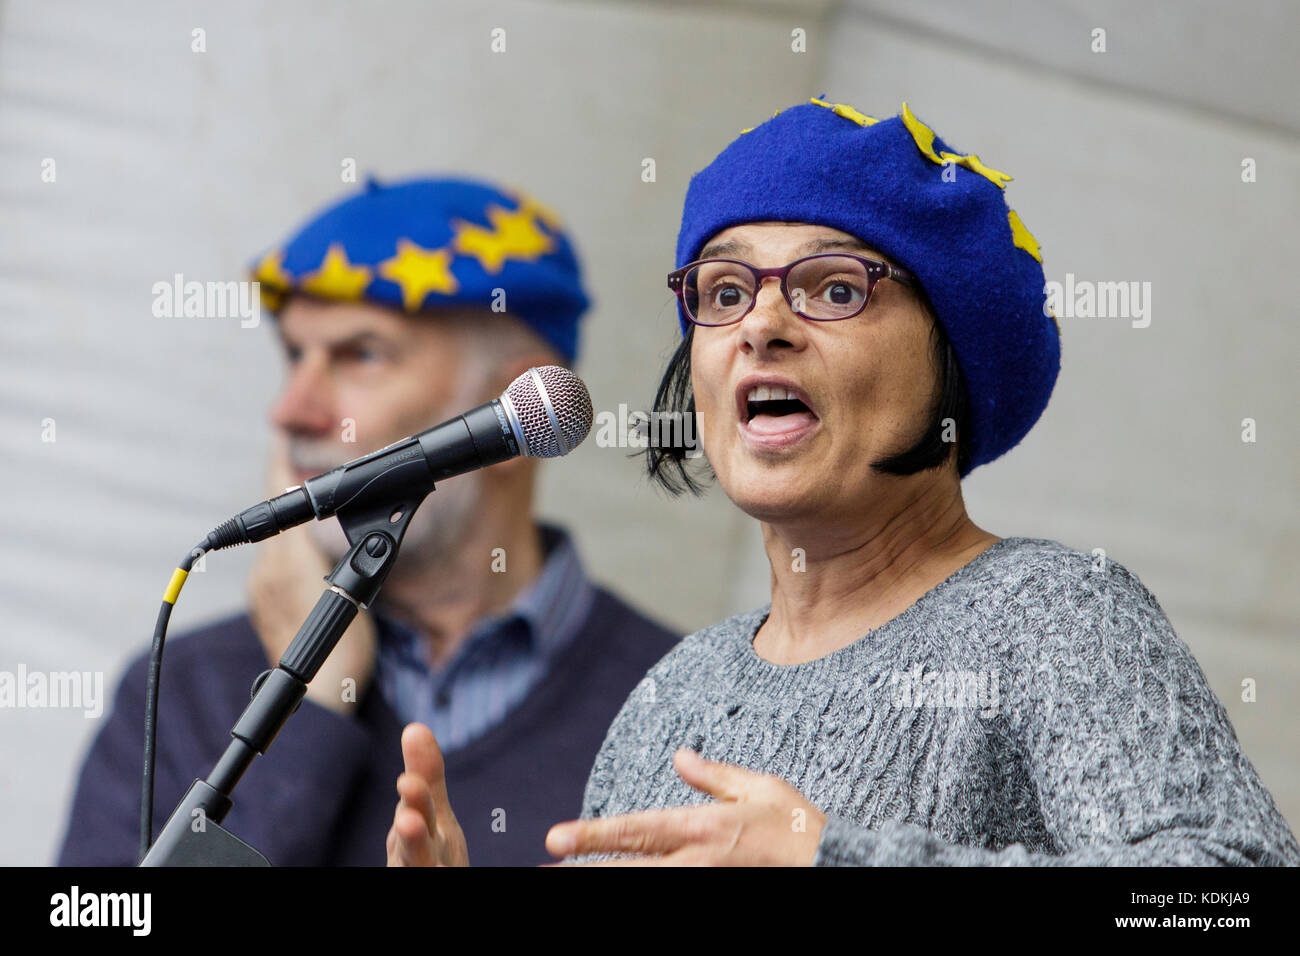 Bristol, UK. 14th Oct, 2017. Thangam Debbonaire Labour MP for Bristol West is pictured as she talks to Pro EU supporters at an anti Brexit protest rally in College Green. The rally was held to allow people to show their support for the UK remaining part of the European Union and to celebrate the South-West and Gibraltar European Parliament Constituency and the benefits that the region enjoys as part of the European Union. Credit: lynchpics/Alamy Live News Stock Photo